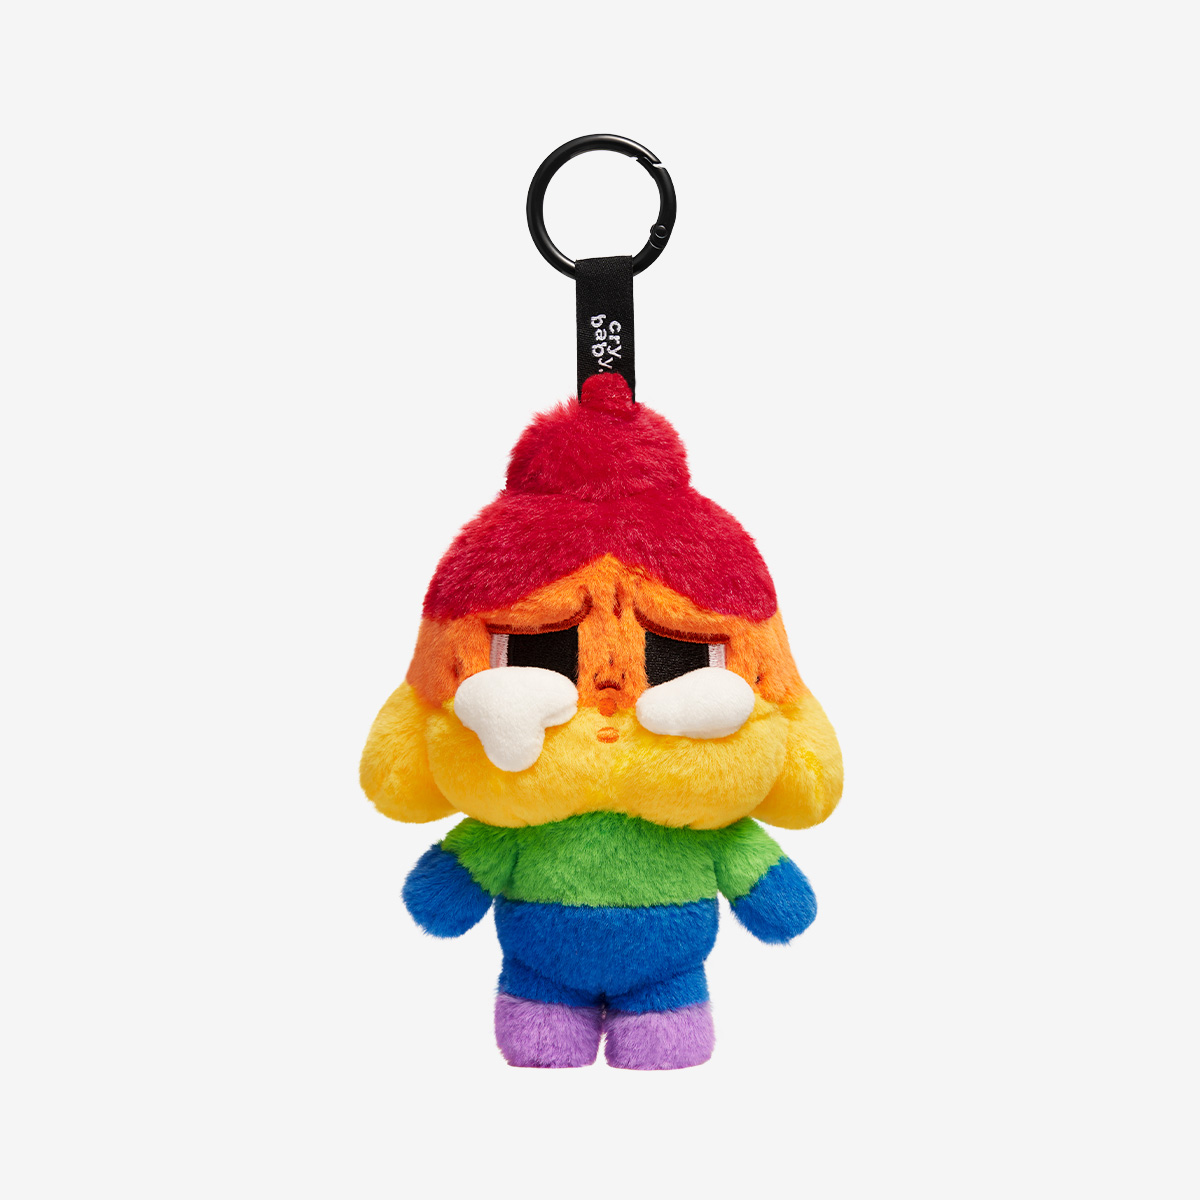 CRYBABY CHEER UP, BABY! SERIES-Plush Doll Pendant - POP MART 